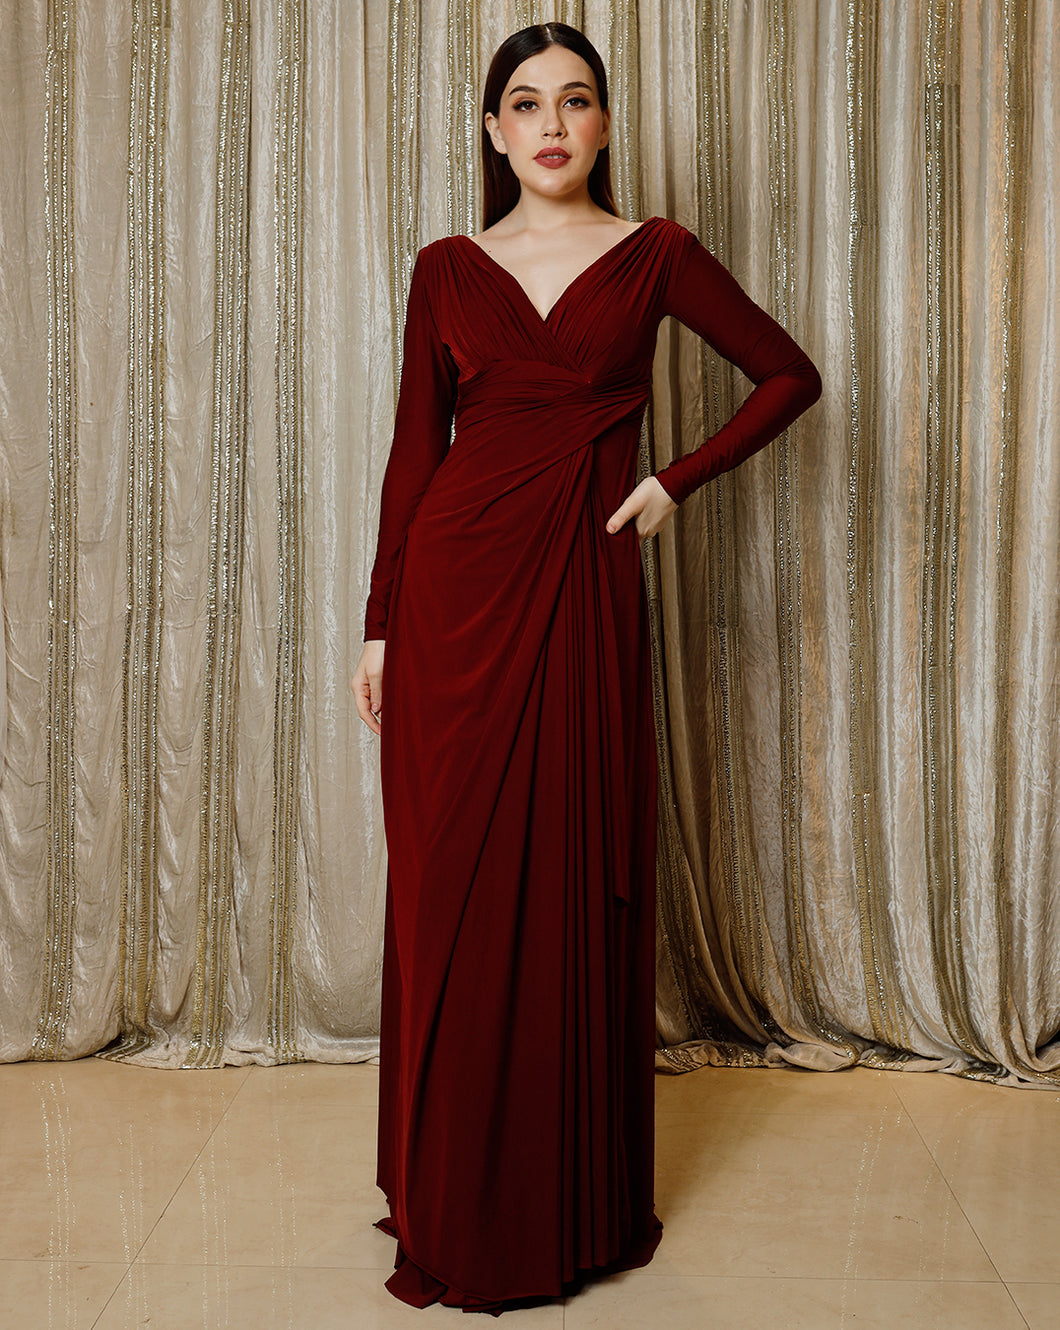 The Maroon Sleeves Gown